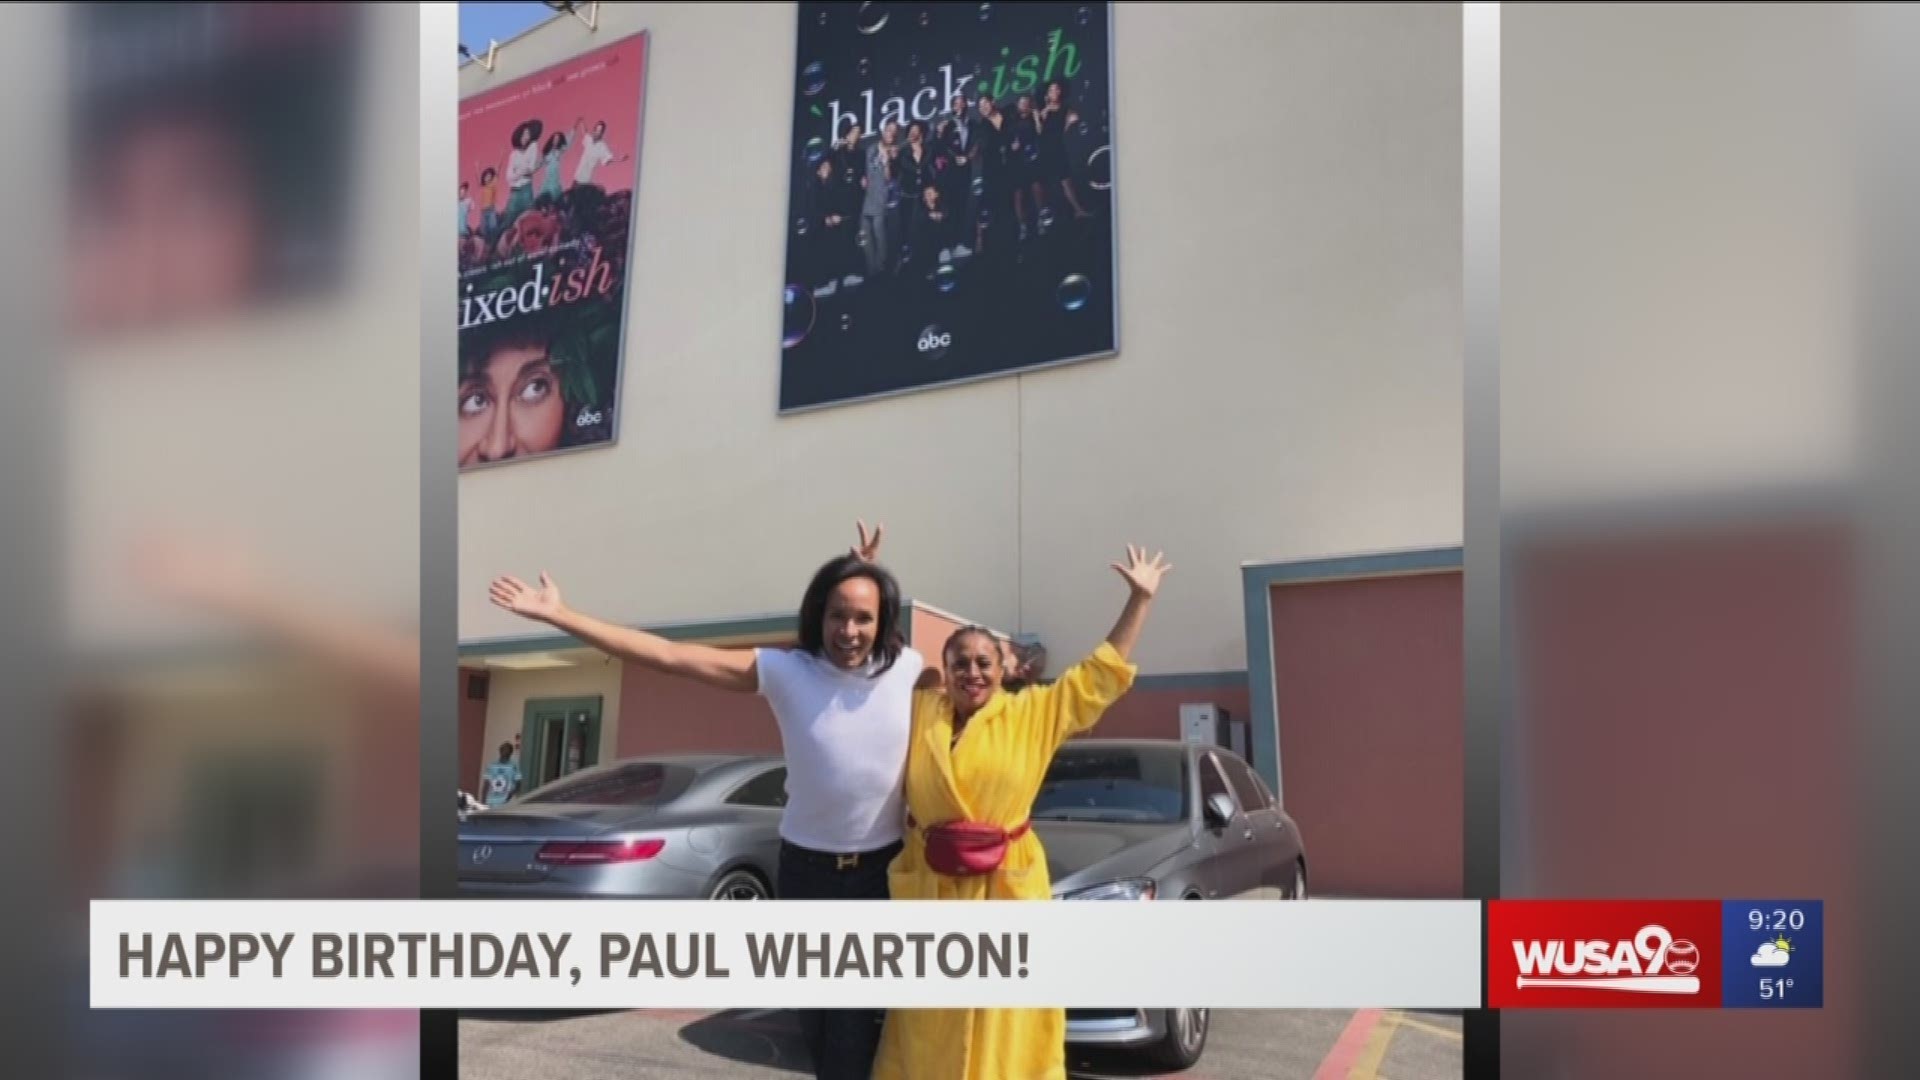 Lifestyle expert Paul Wharton lives quite the extravagant lifestyle. With such authentic happiness, Wharton shared his tips on how to live your best life!